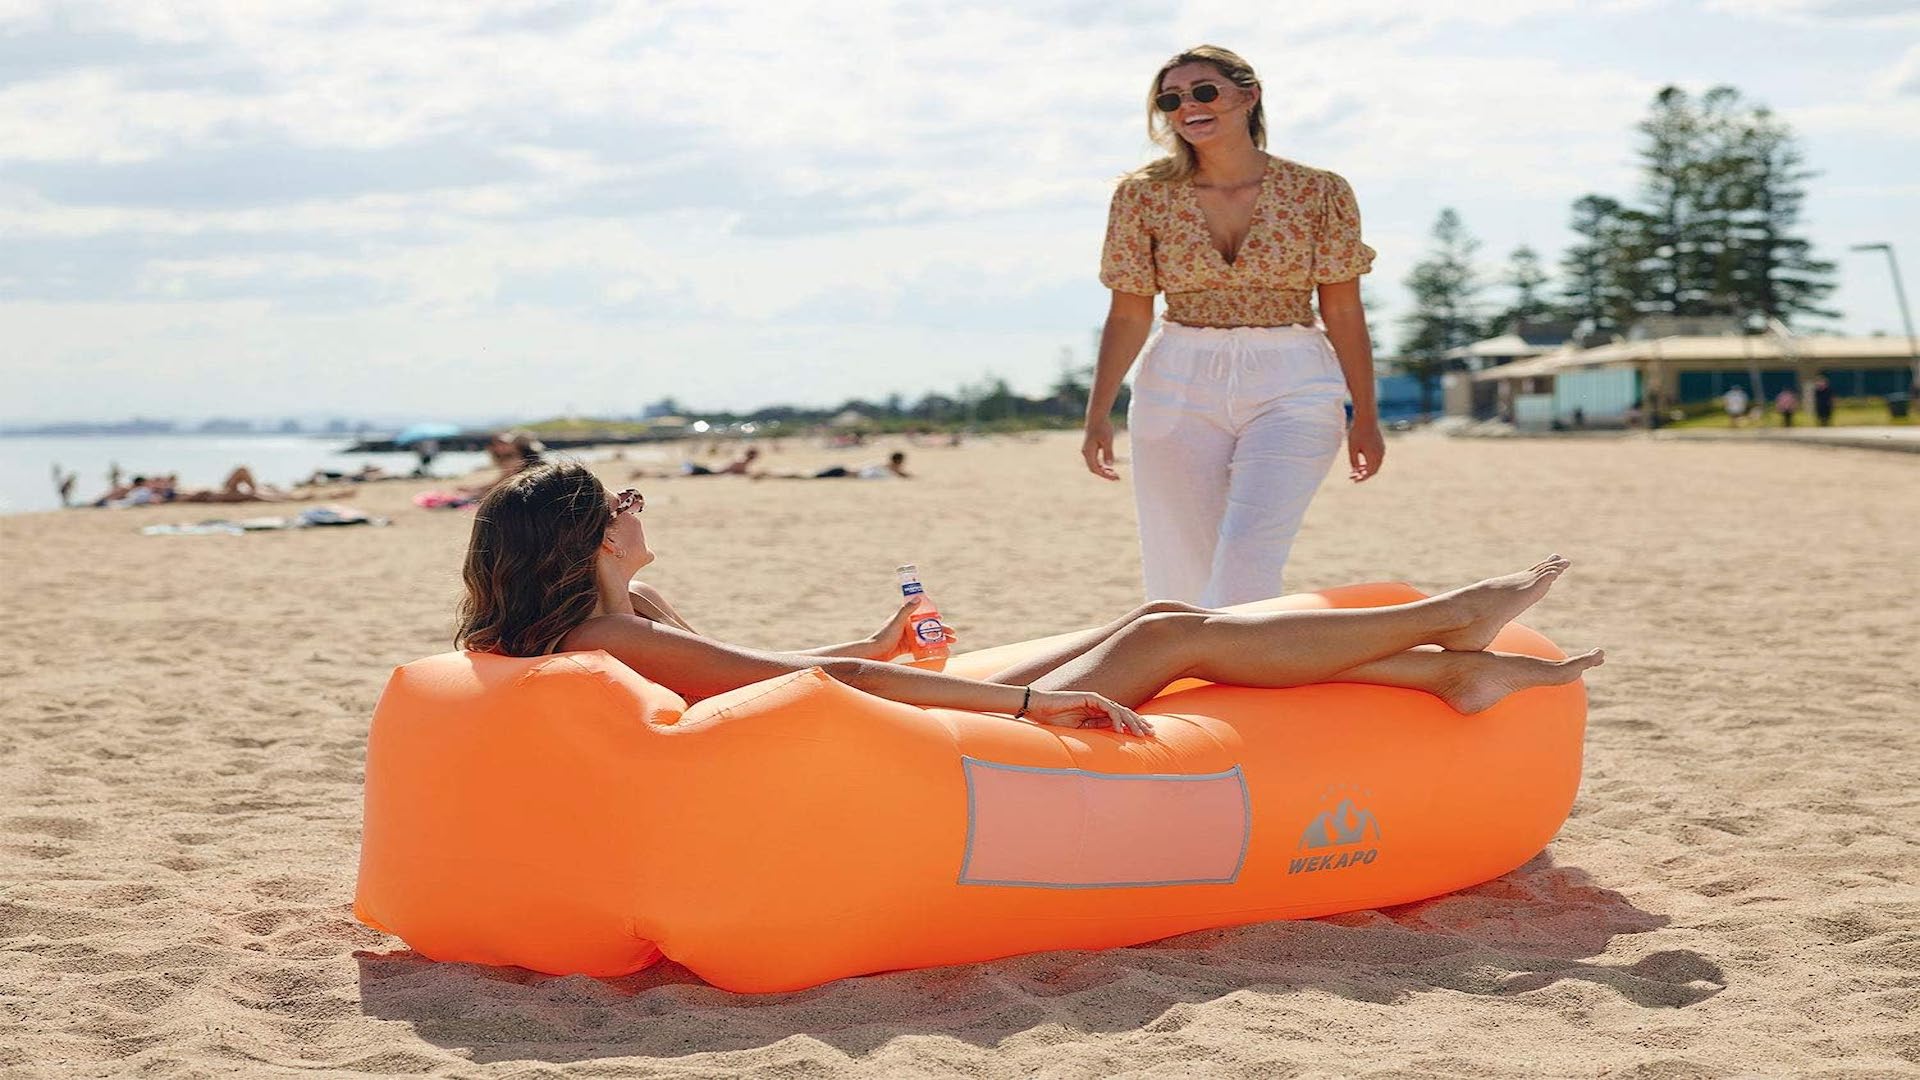 Wekapo’s Inflatable Air Lounger 